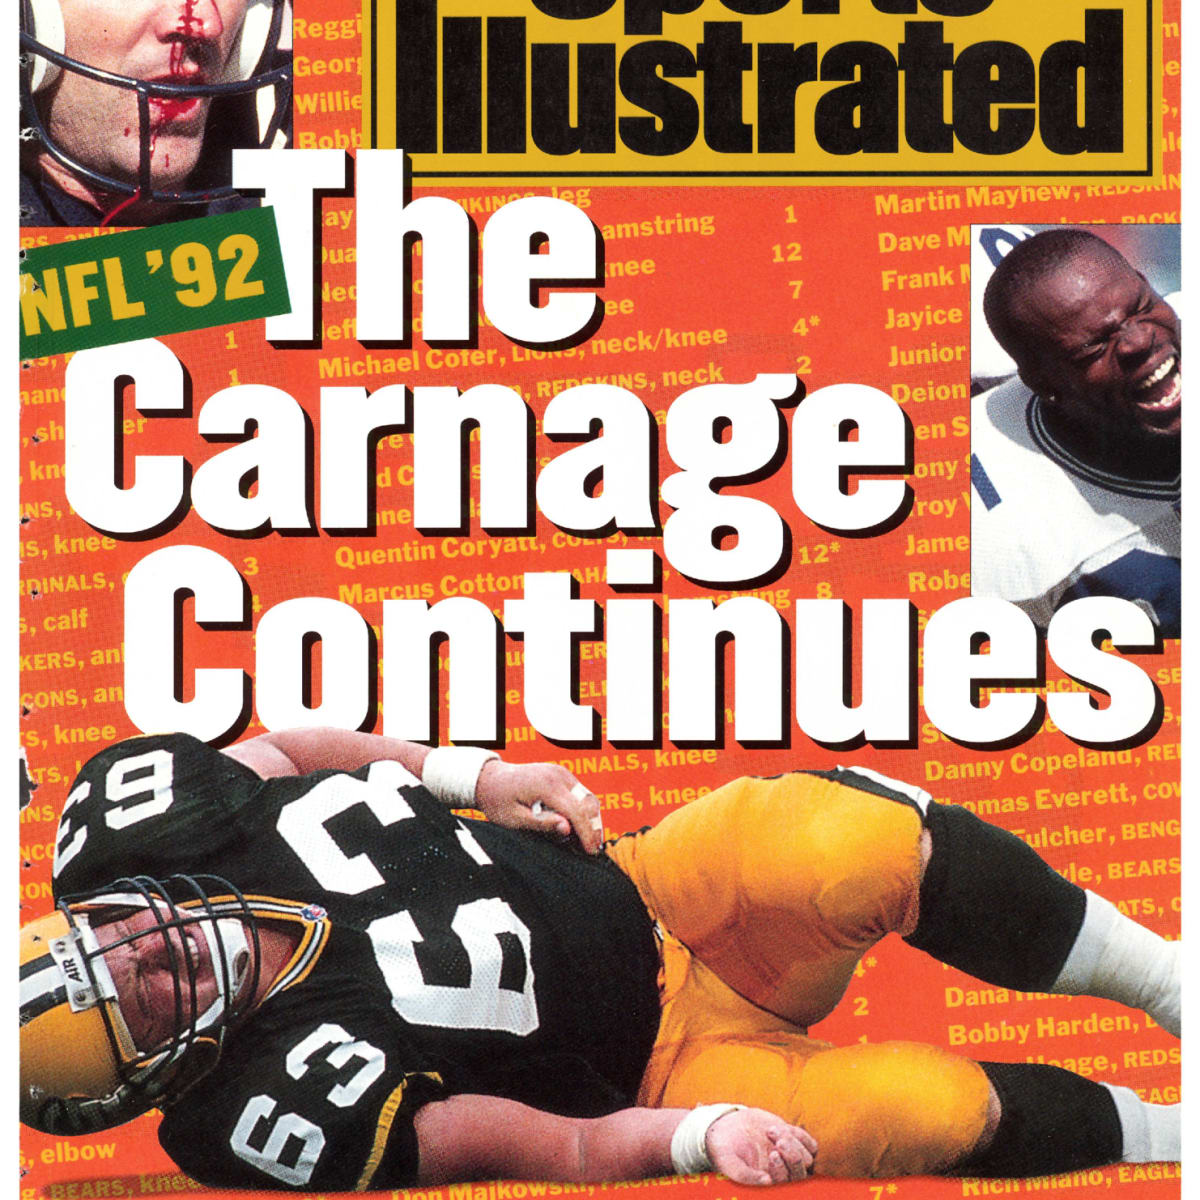 AN UNHAPPY ENDING - Sports Illustrated Vault